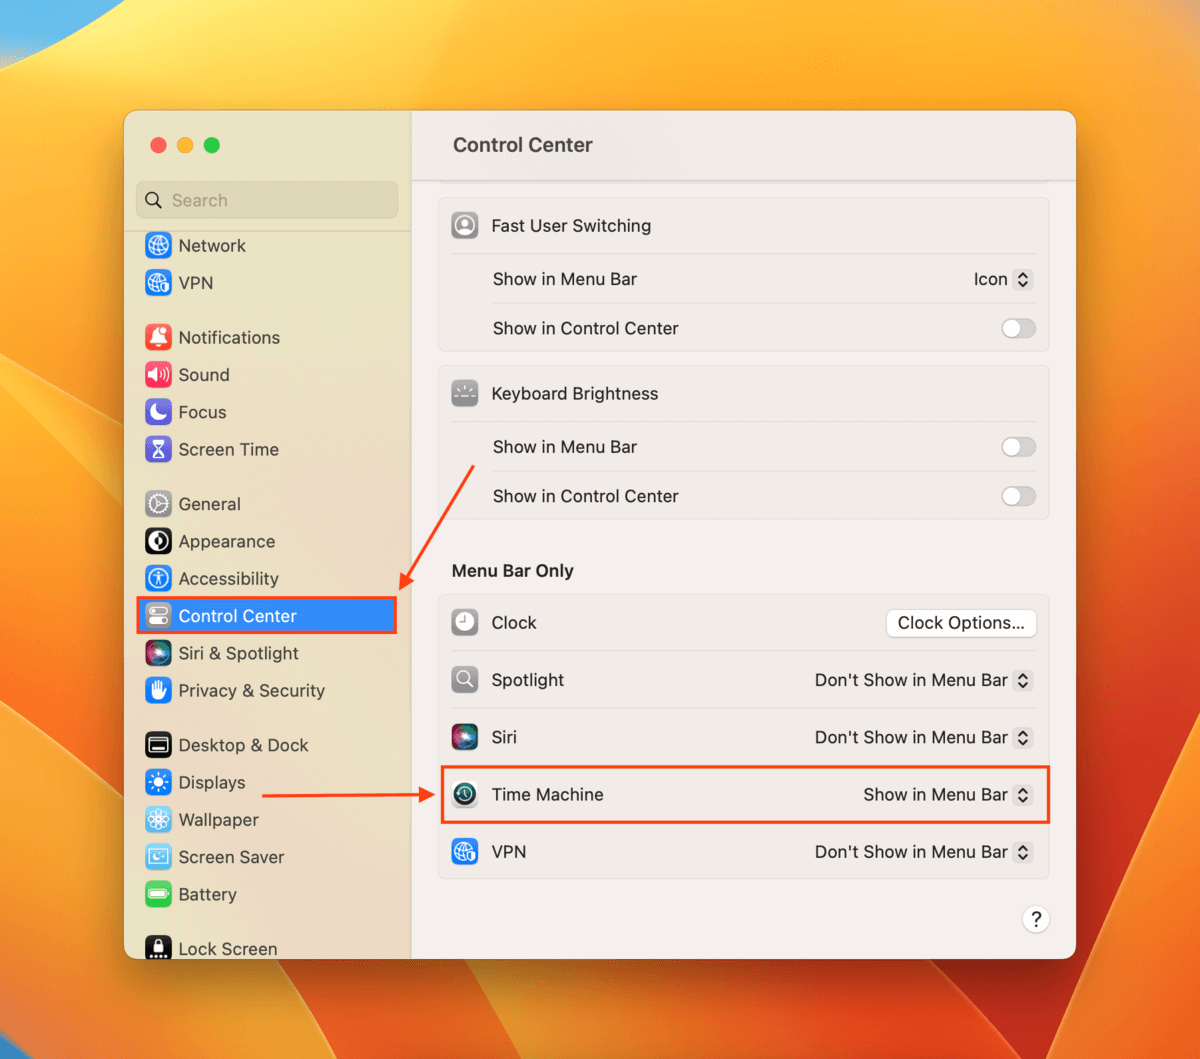 Time Machine settings in the Control Center menu in System Settings